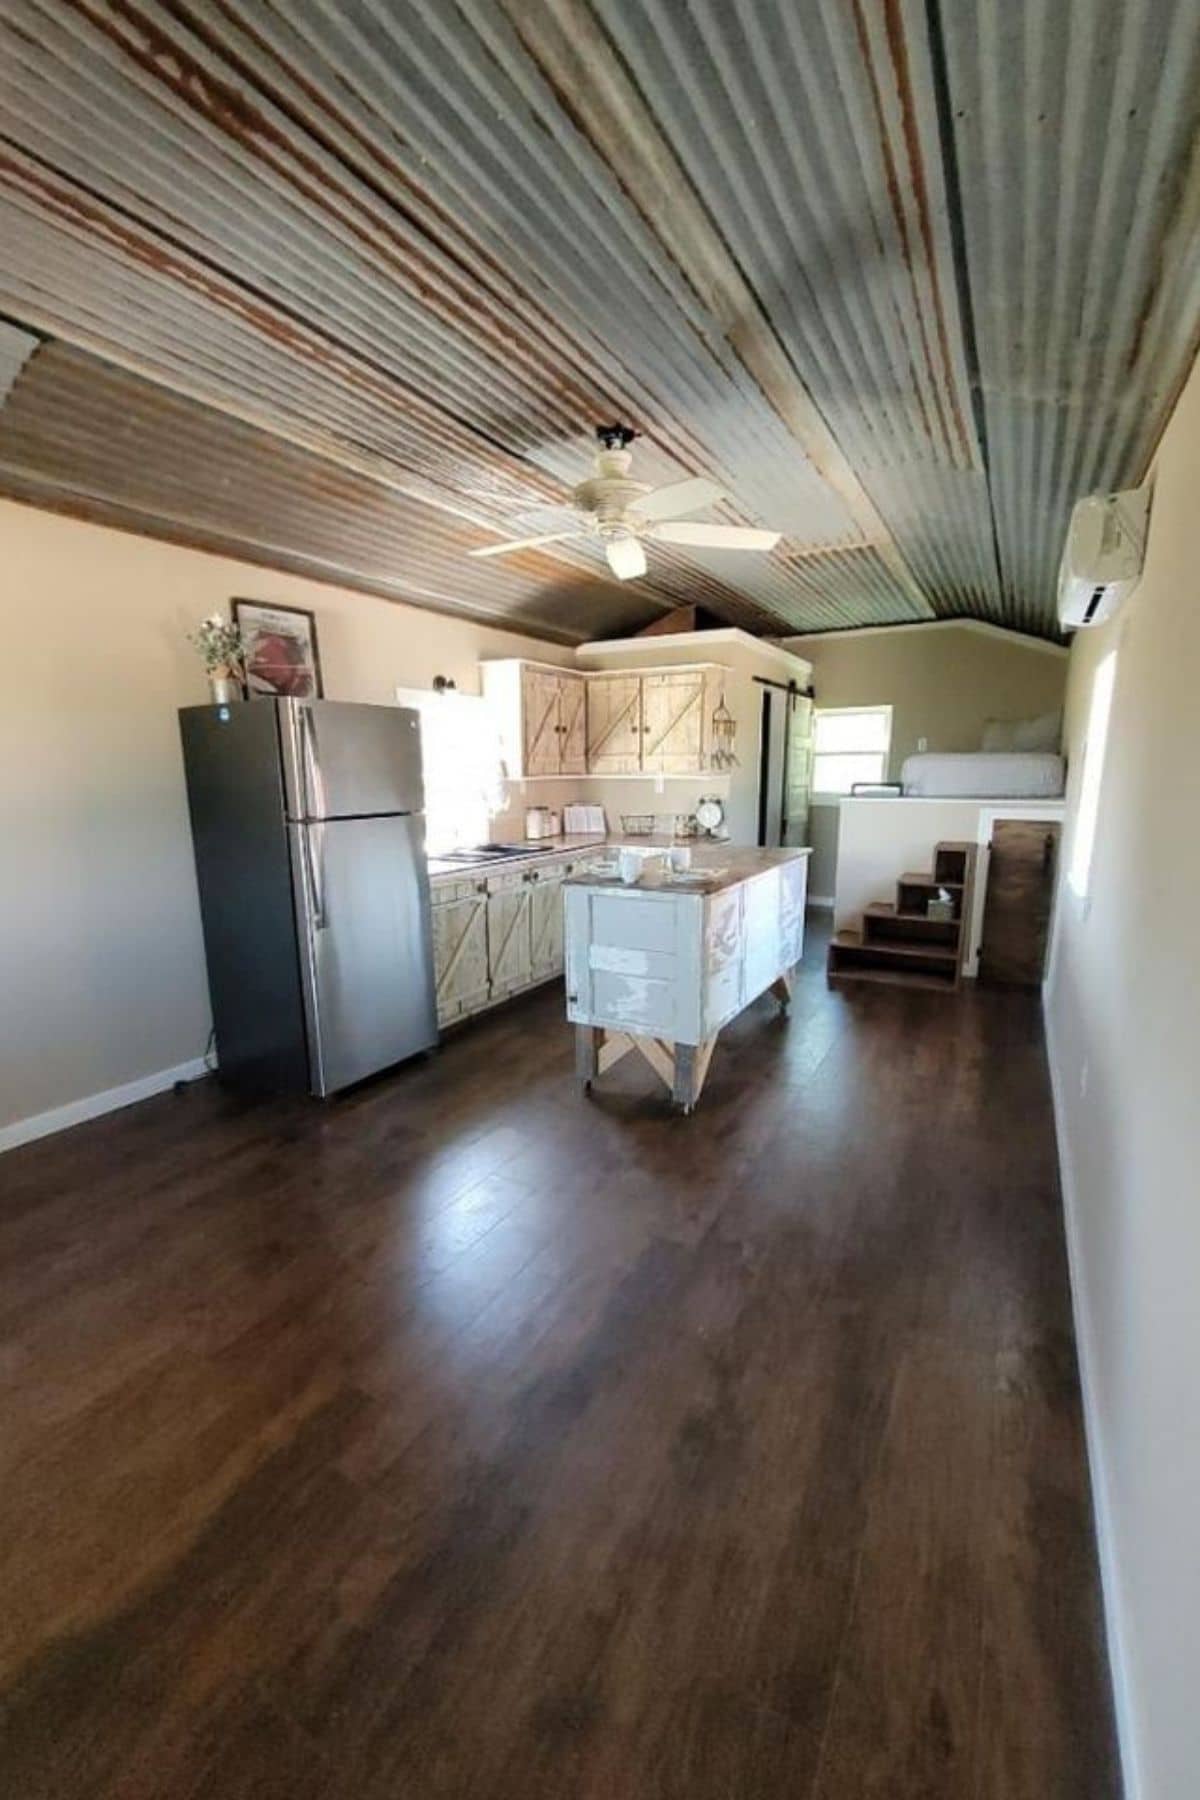 Living room in tiny home with wood floors and island in background